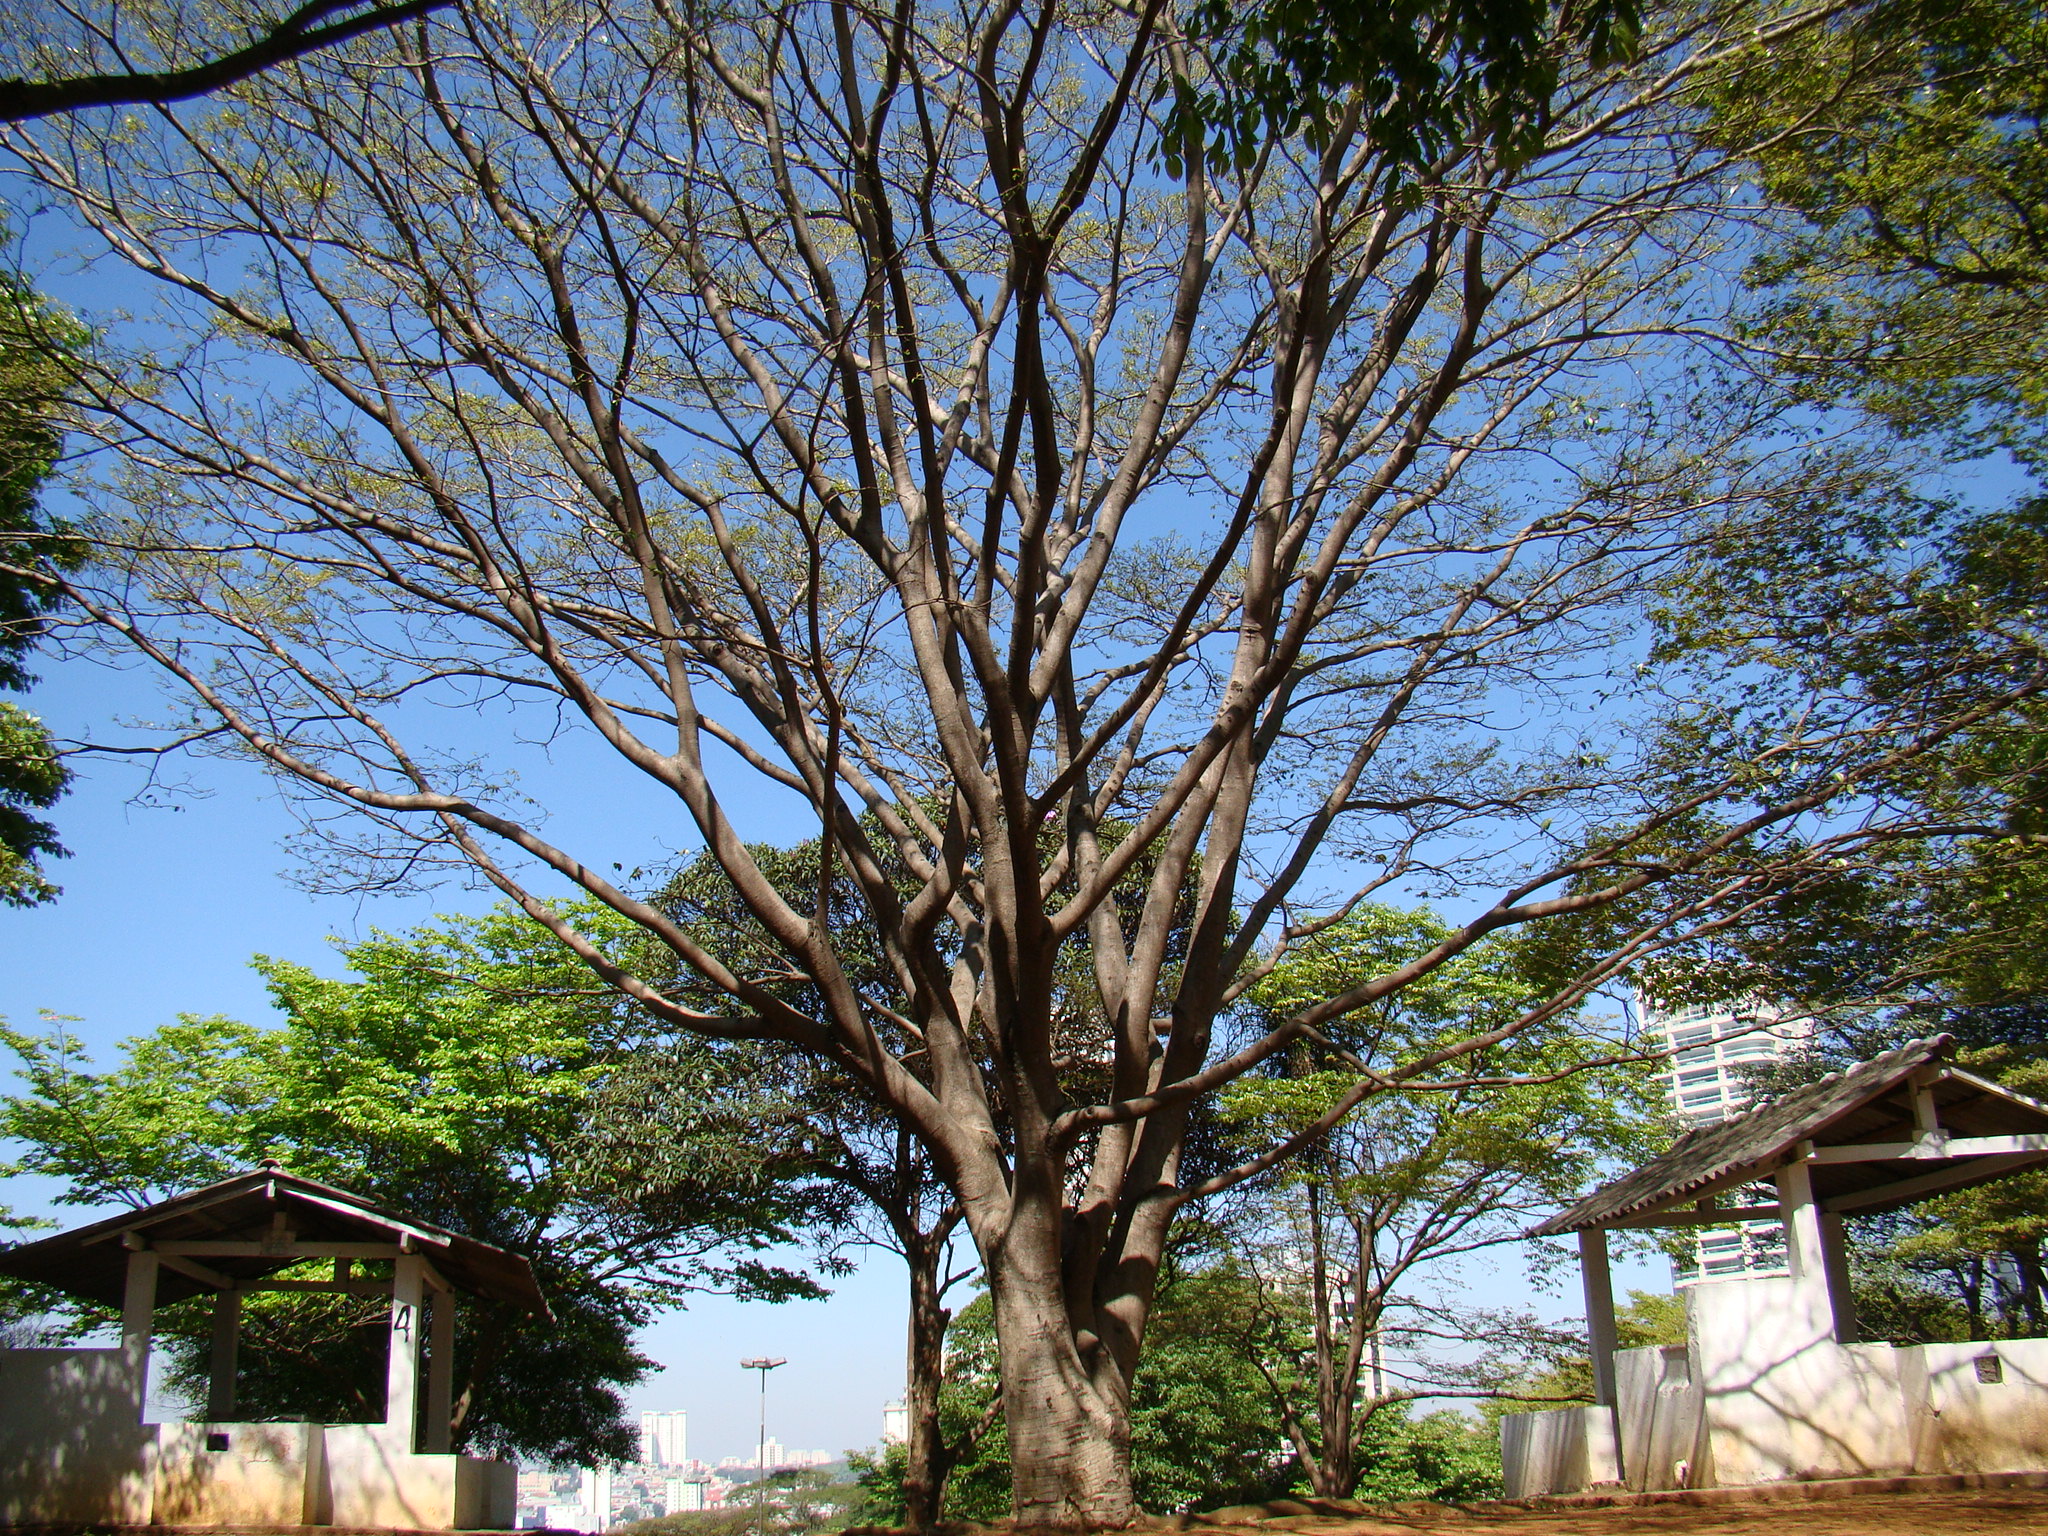 a tree is in the foreground, and some structures next to it are shown